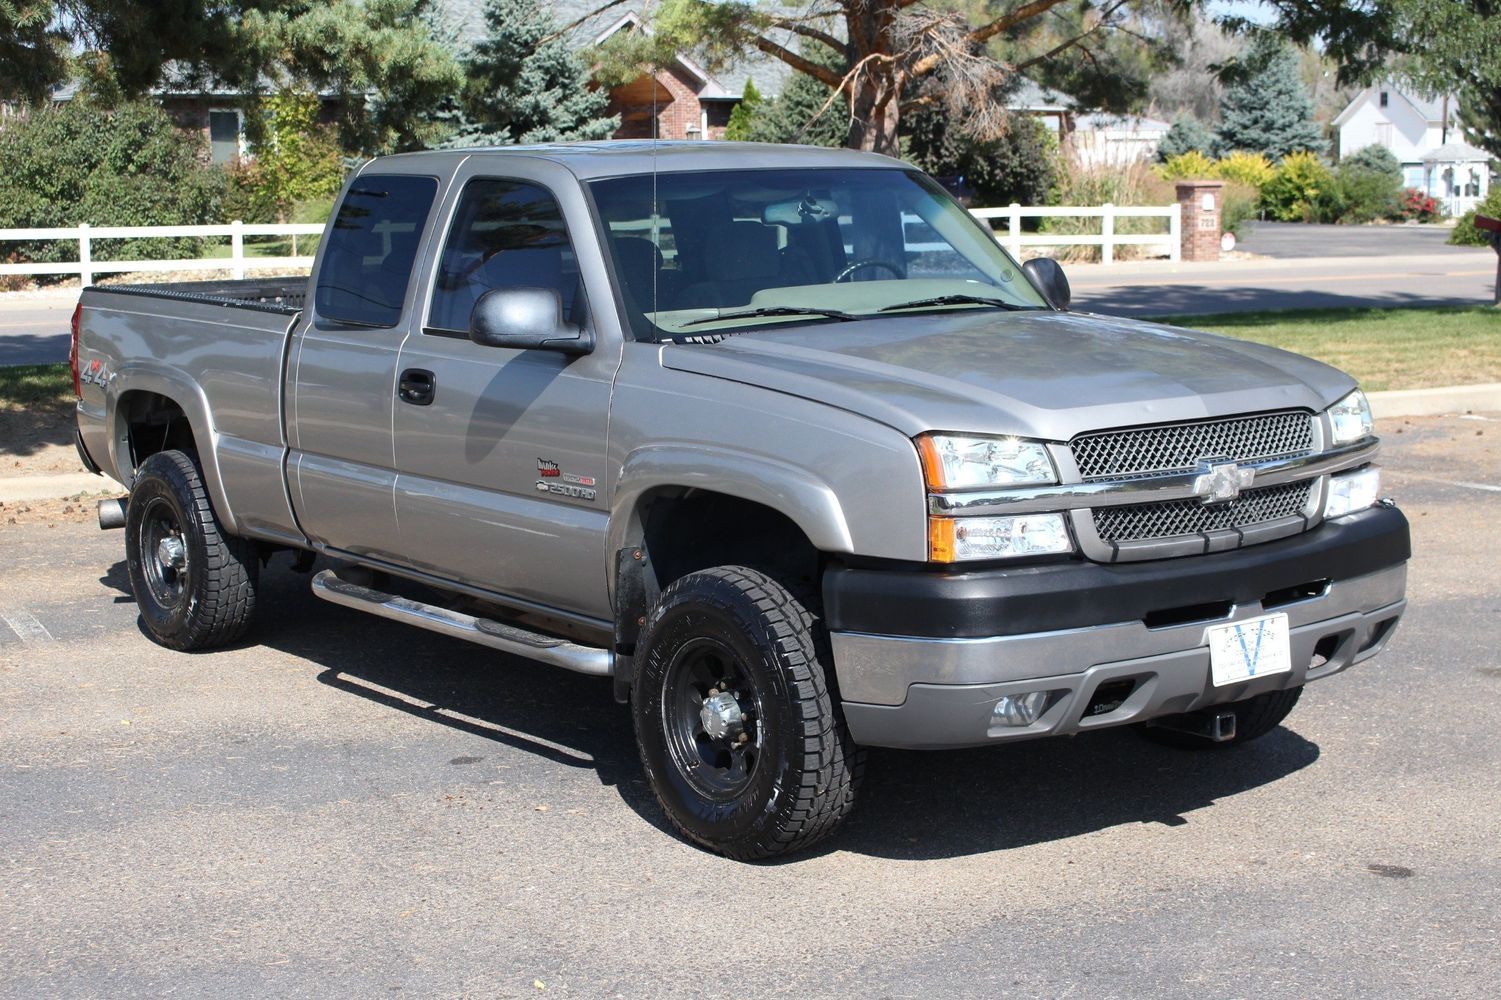 2003 Chevy 2500hd 8.1 Towing Capacity